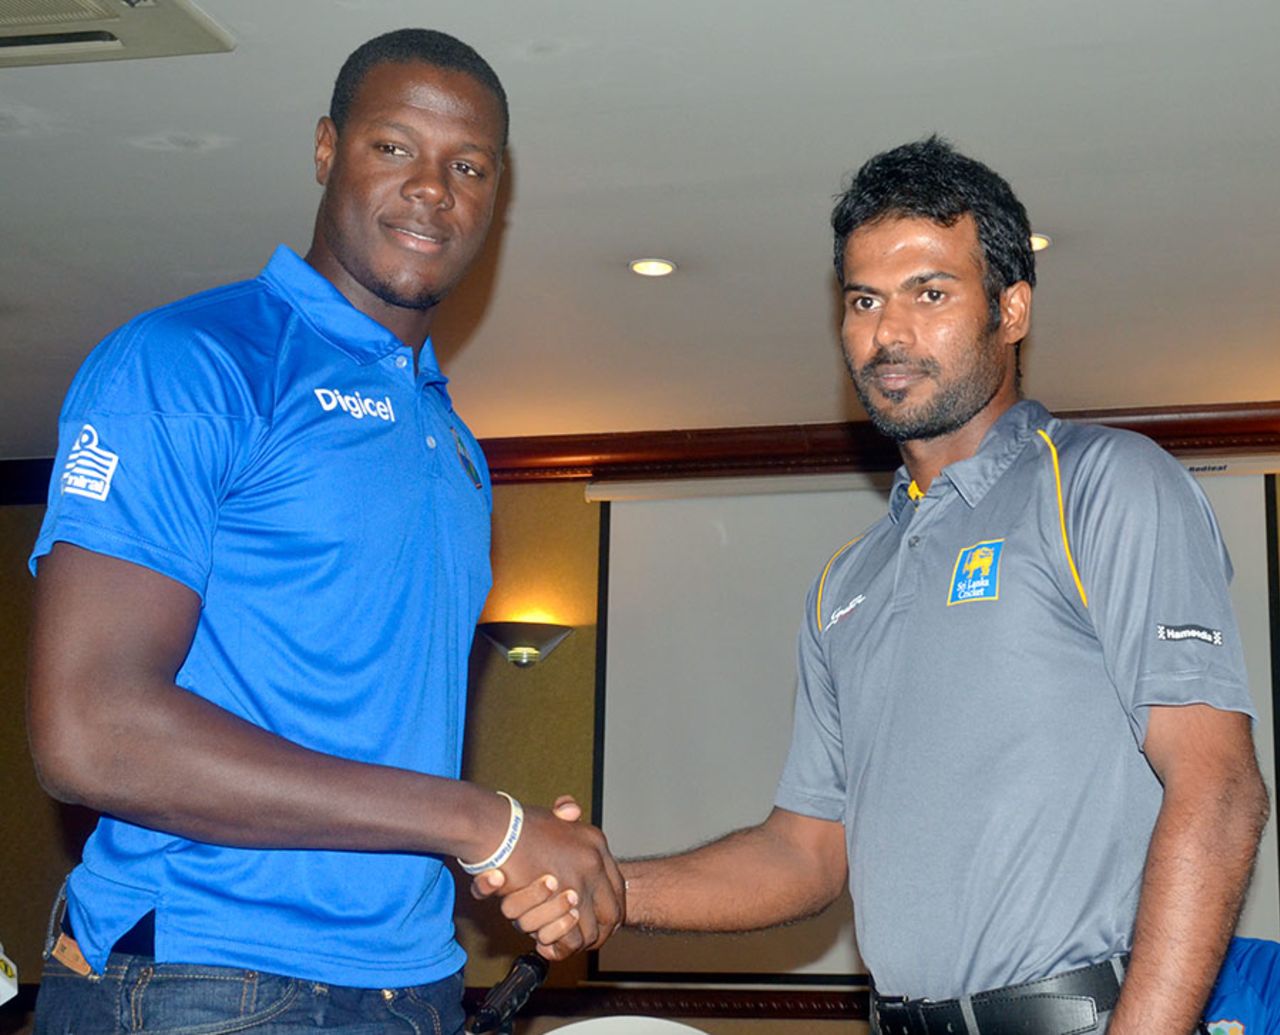 Carlos Brathwaite and Upul Tharanga shake hands at the start of the West Indies A tour of Sri Lanka, Colombo, October 8, 2014